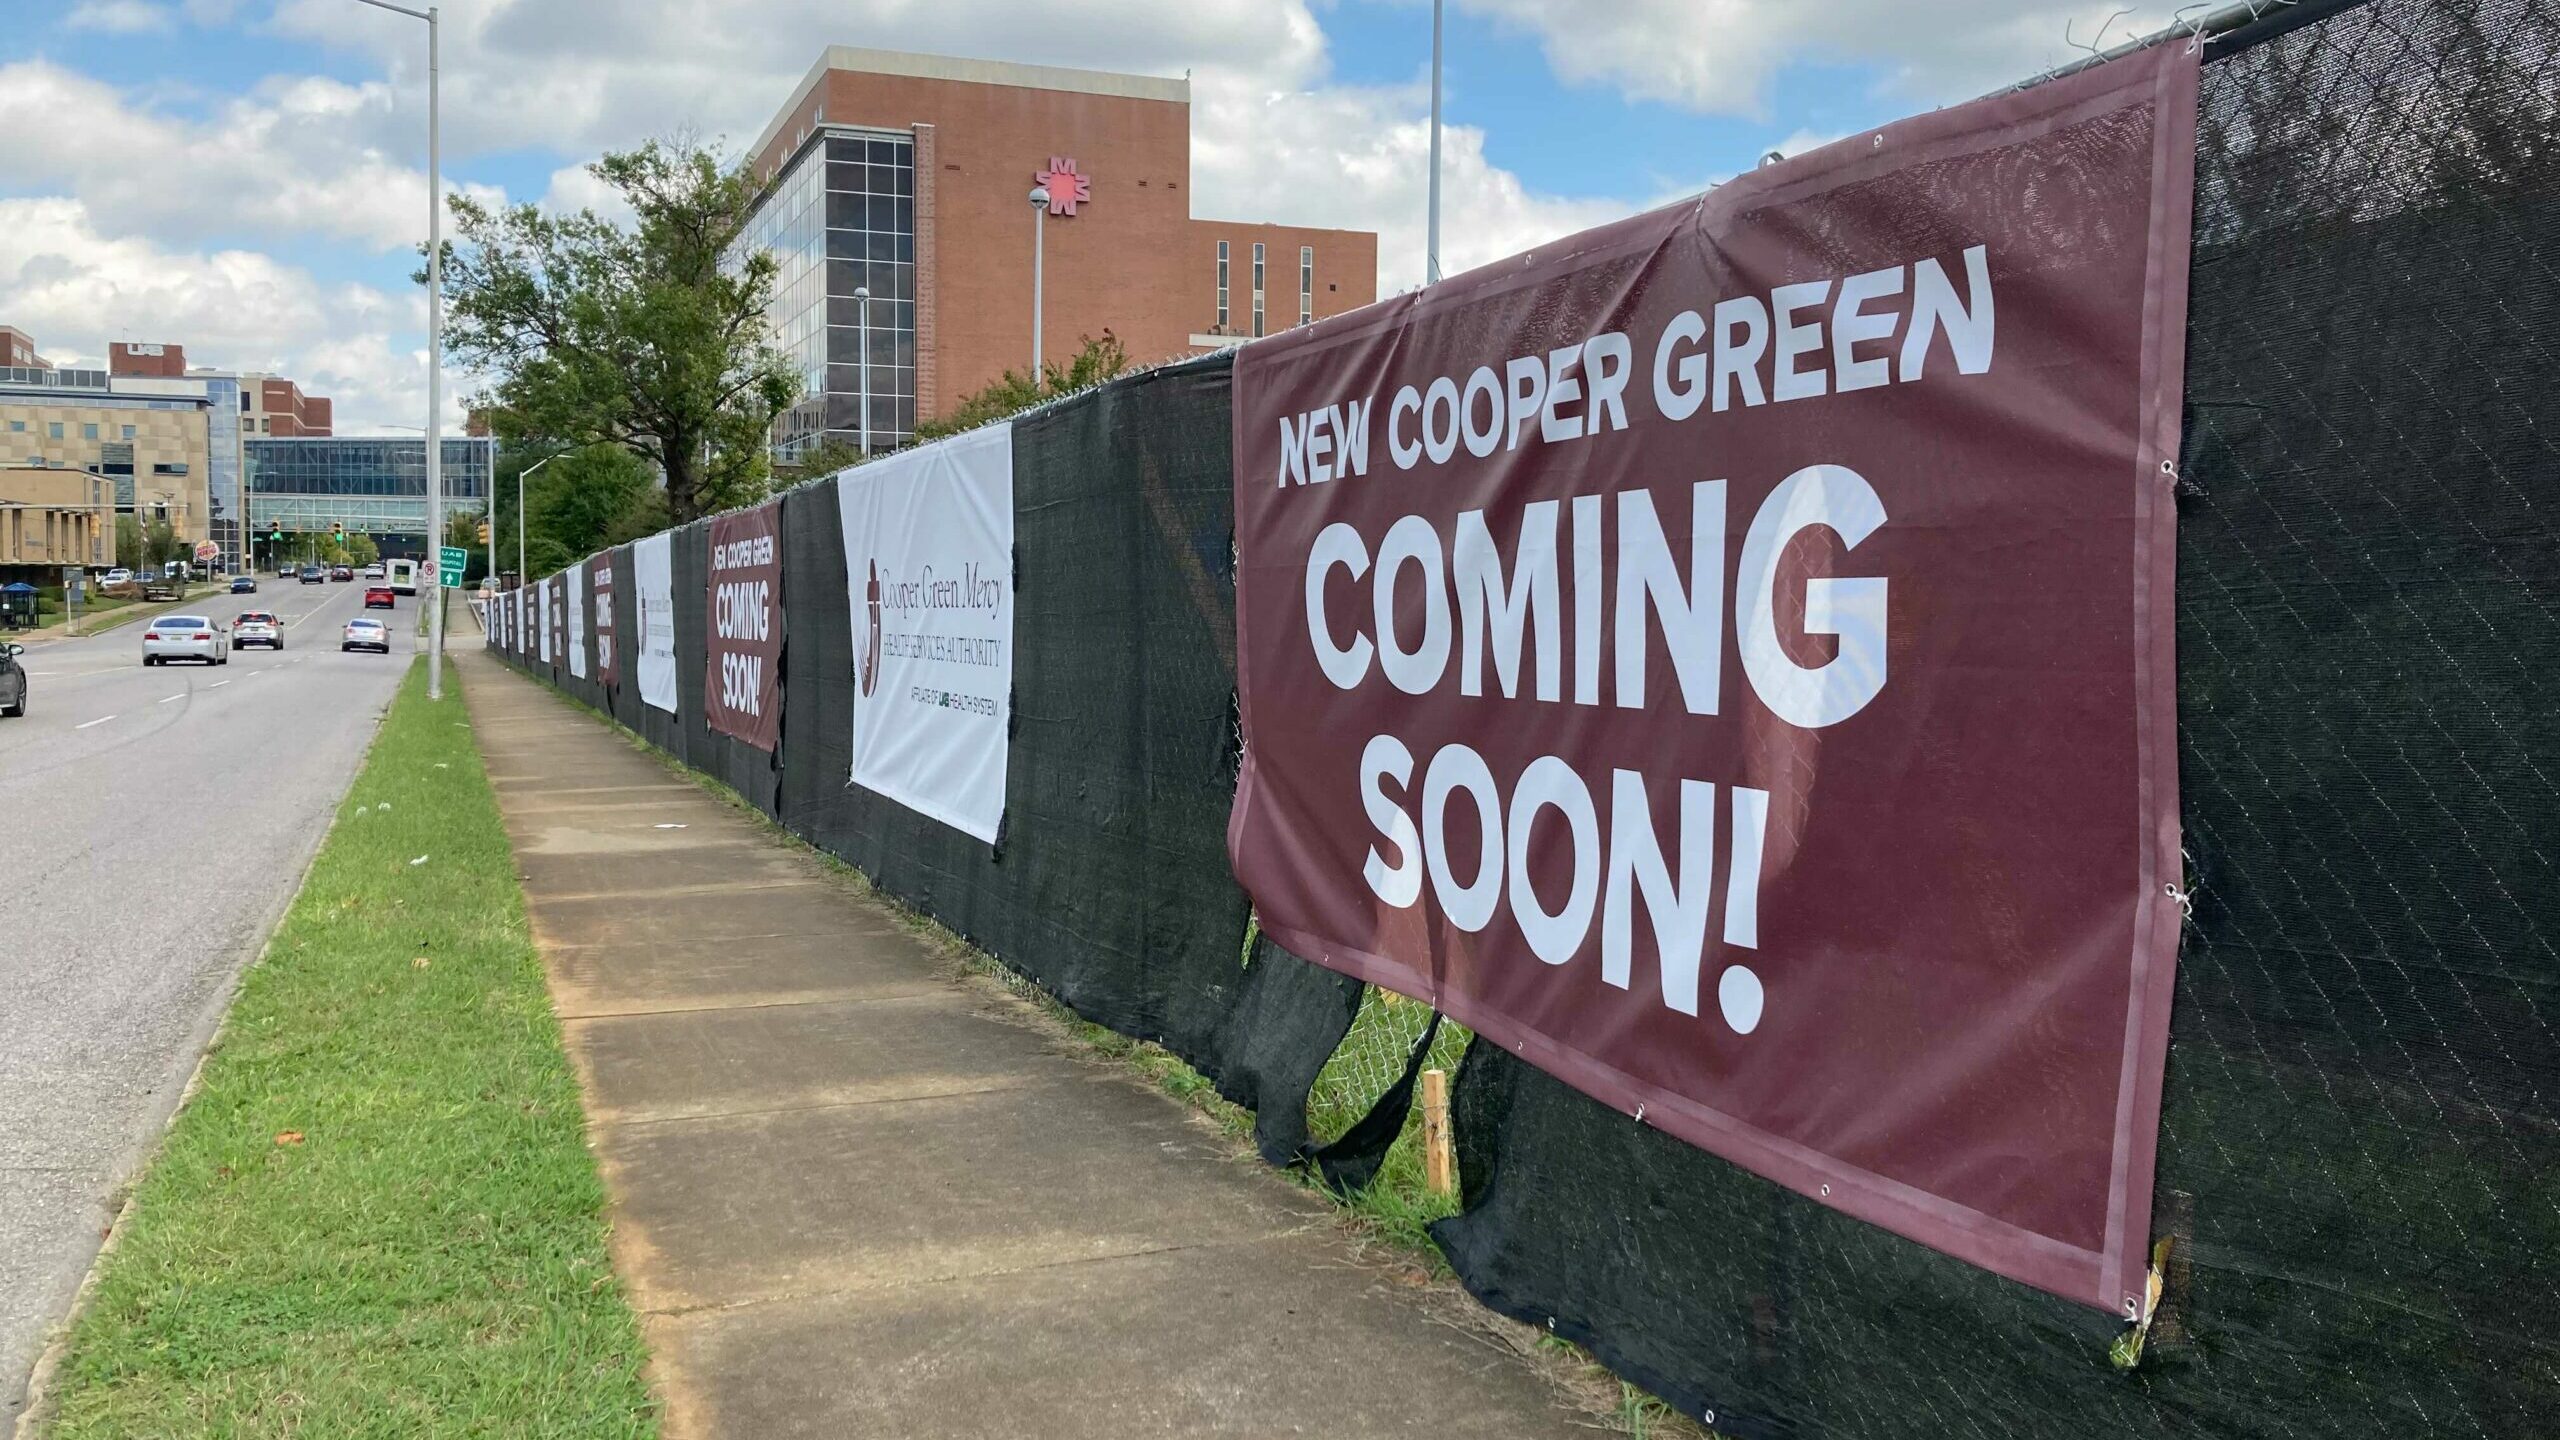 UAB to build new Cooper Green clinic, replacing old hospital by 2025